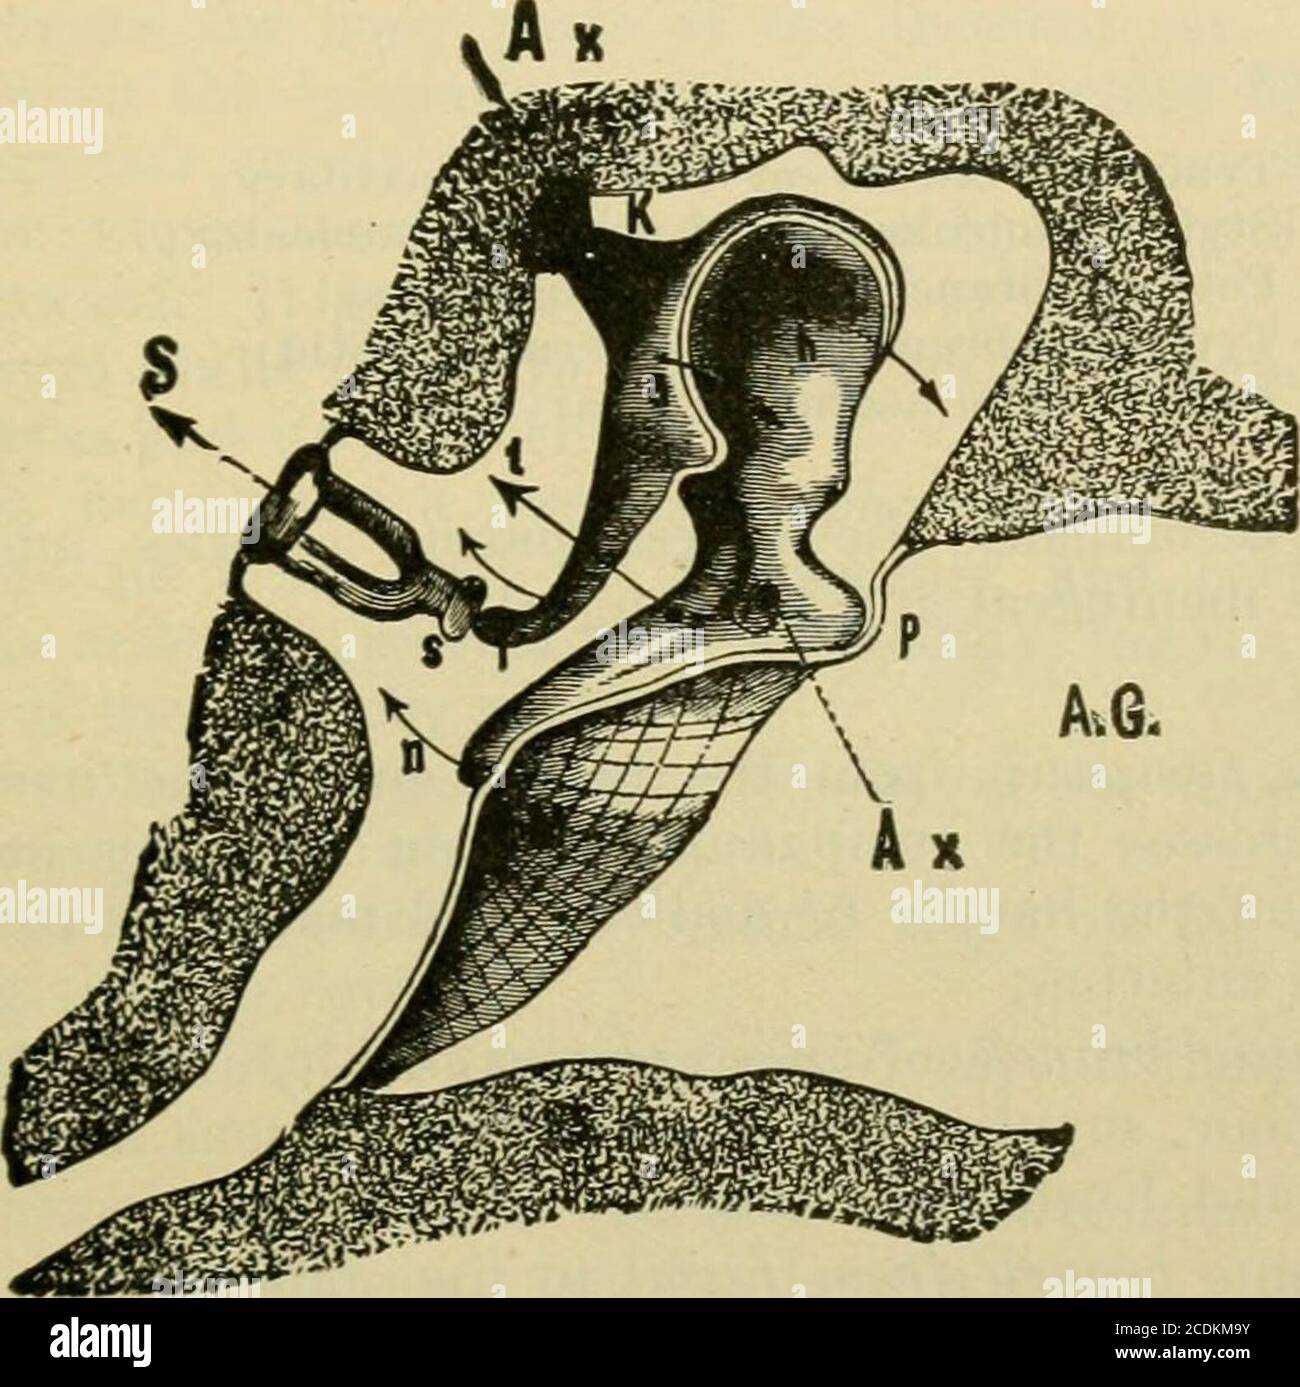 Illustration of stapes morphology following the nomenclature of